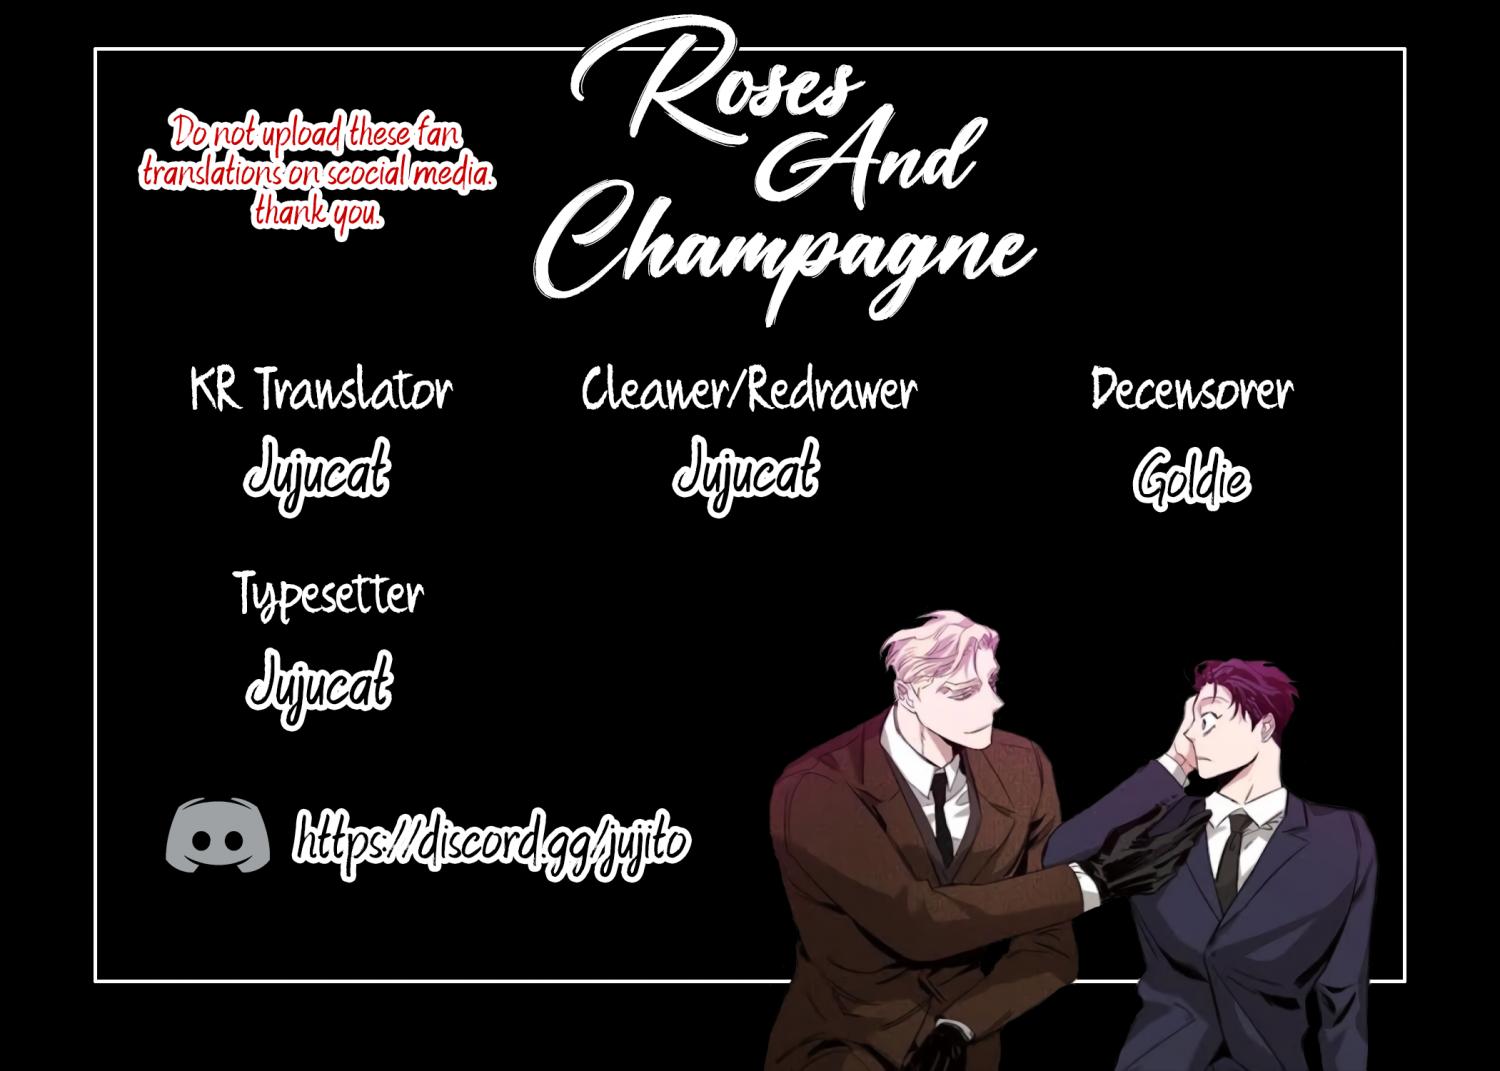 Roses And Champagne - Page 1